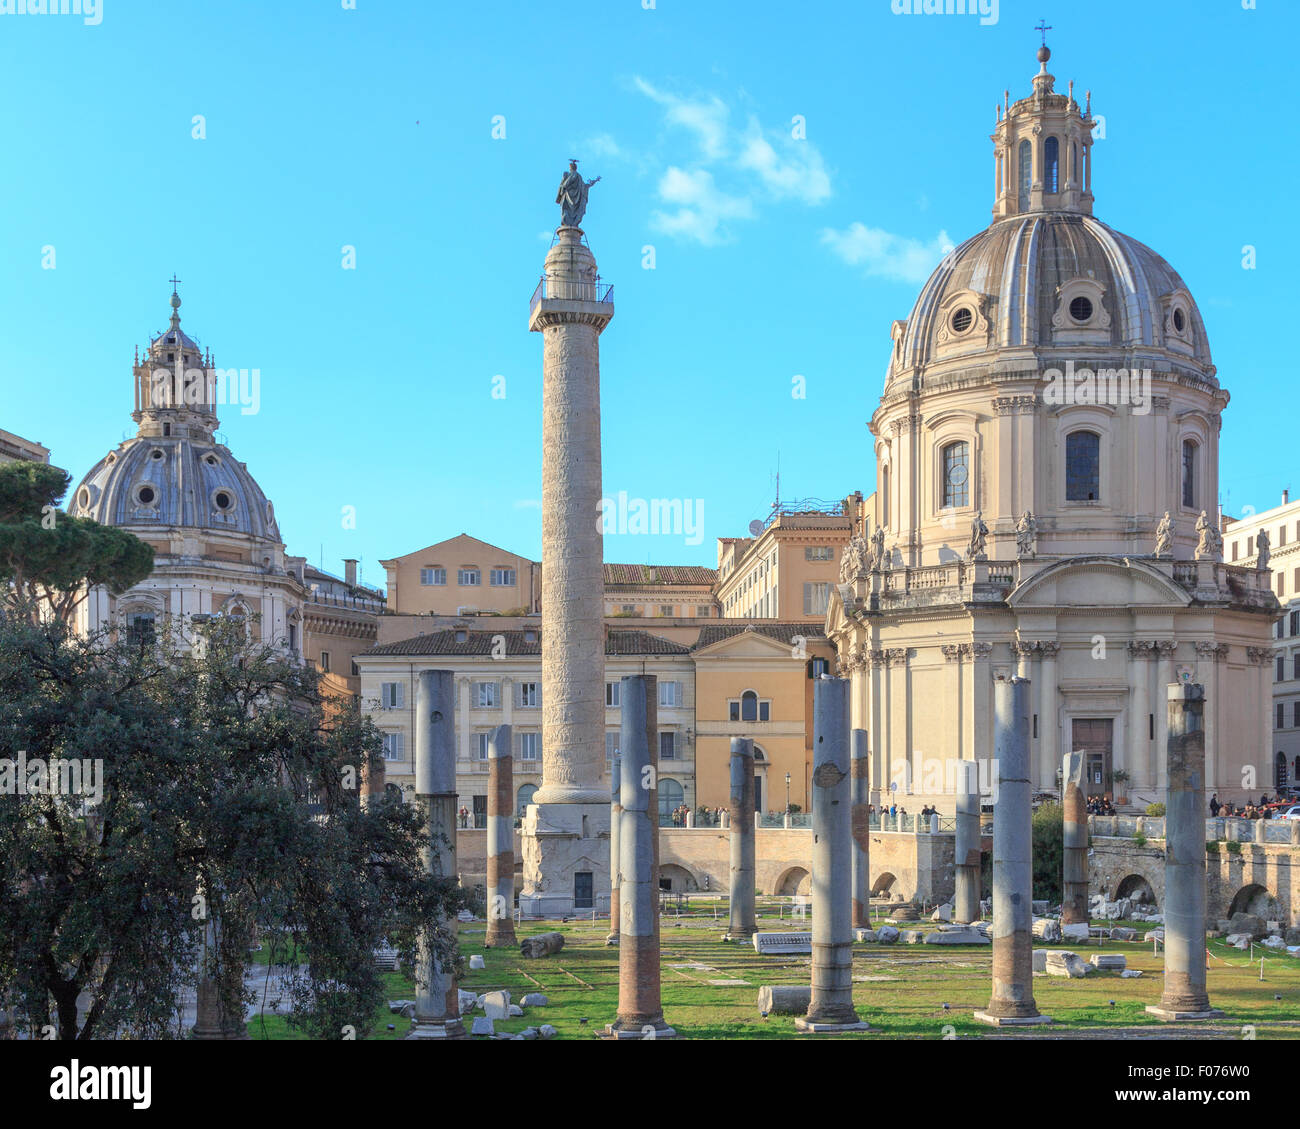 View across the ancient ruins of Trajan's Forum towards Trajan's Column in Rome, Italy. Stock Photo